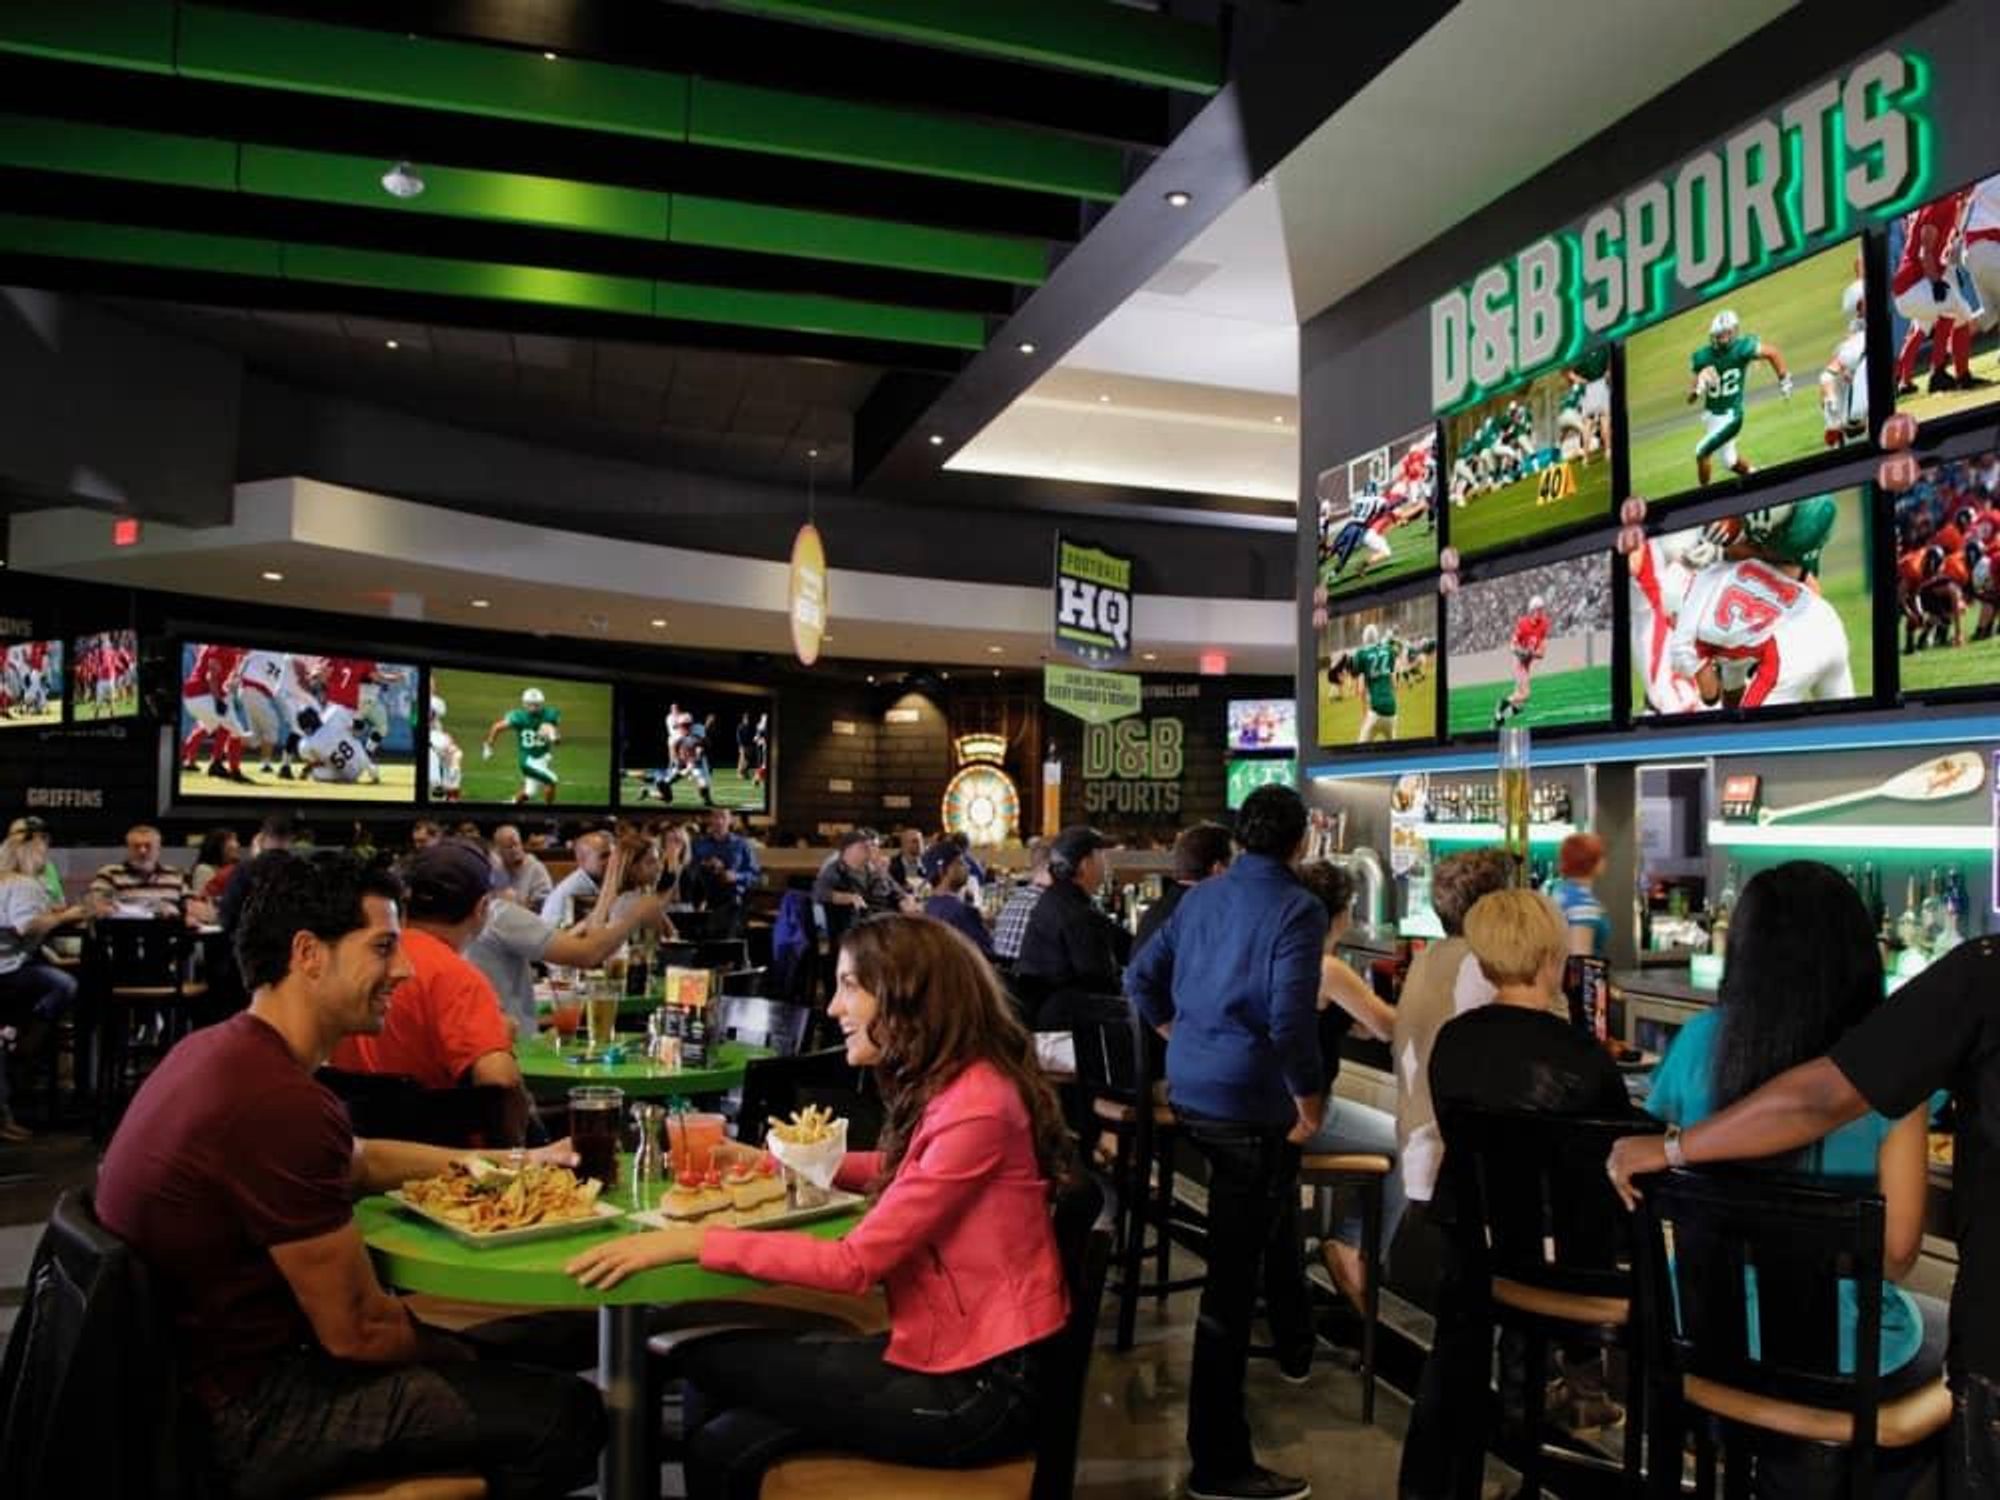 Dave and Buster's sports bar interior